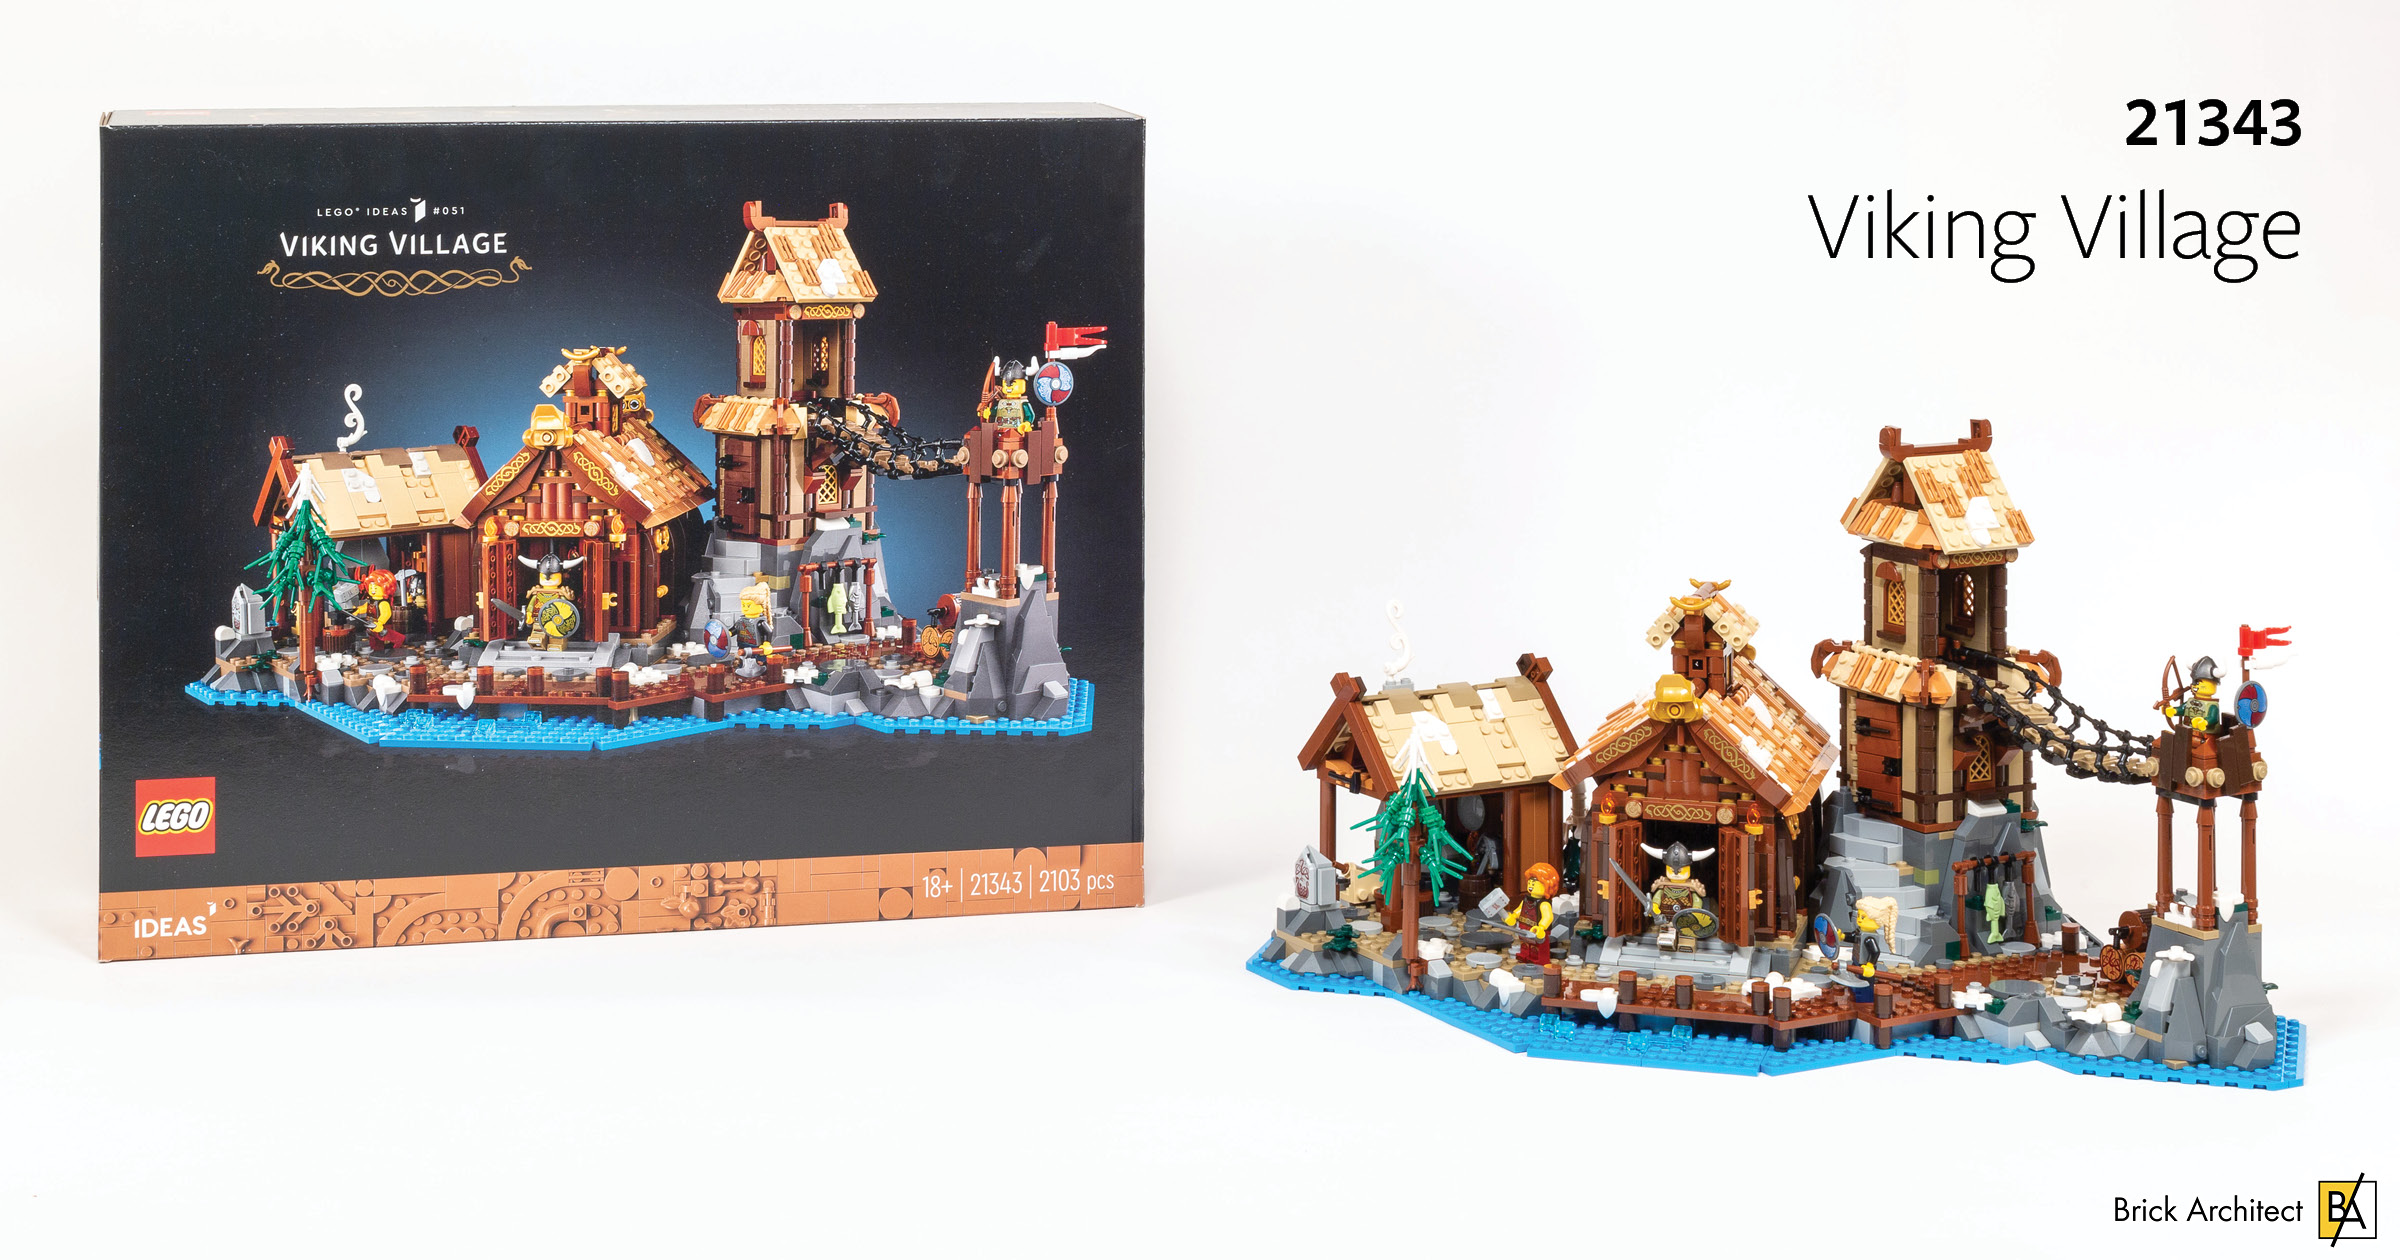 #21343 Viking Village is the best set we reviewed this month.